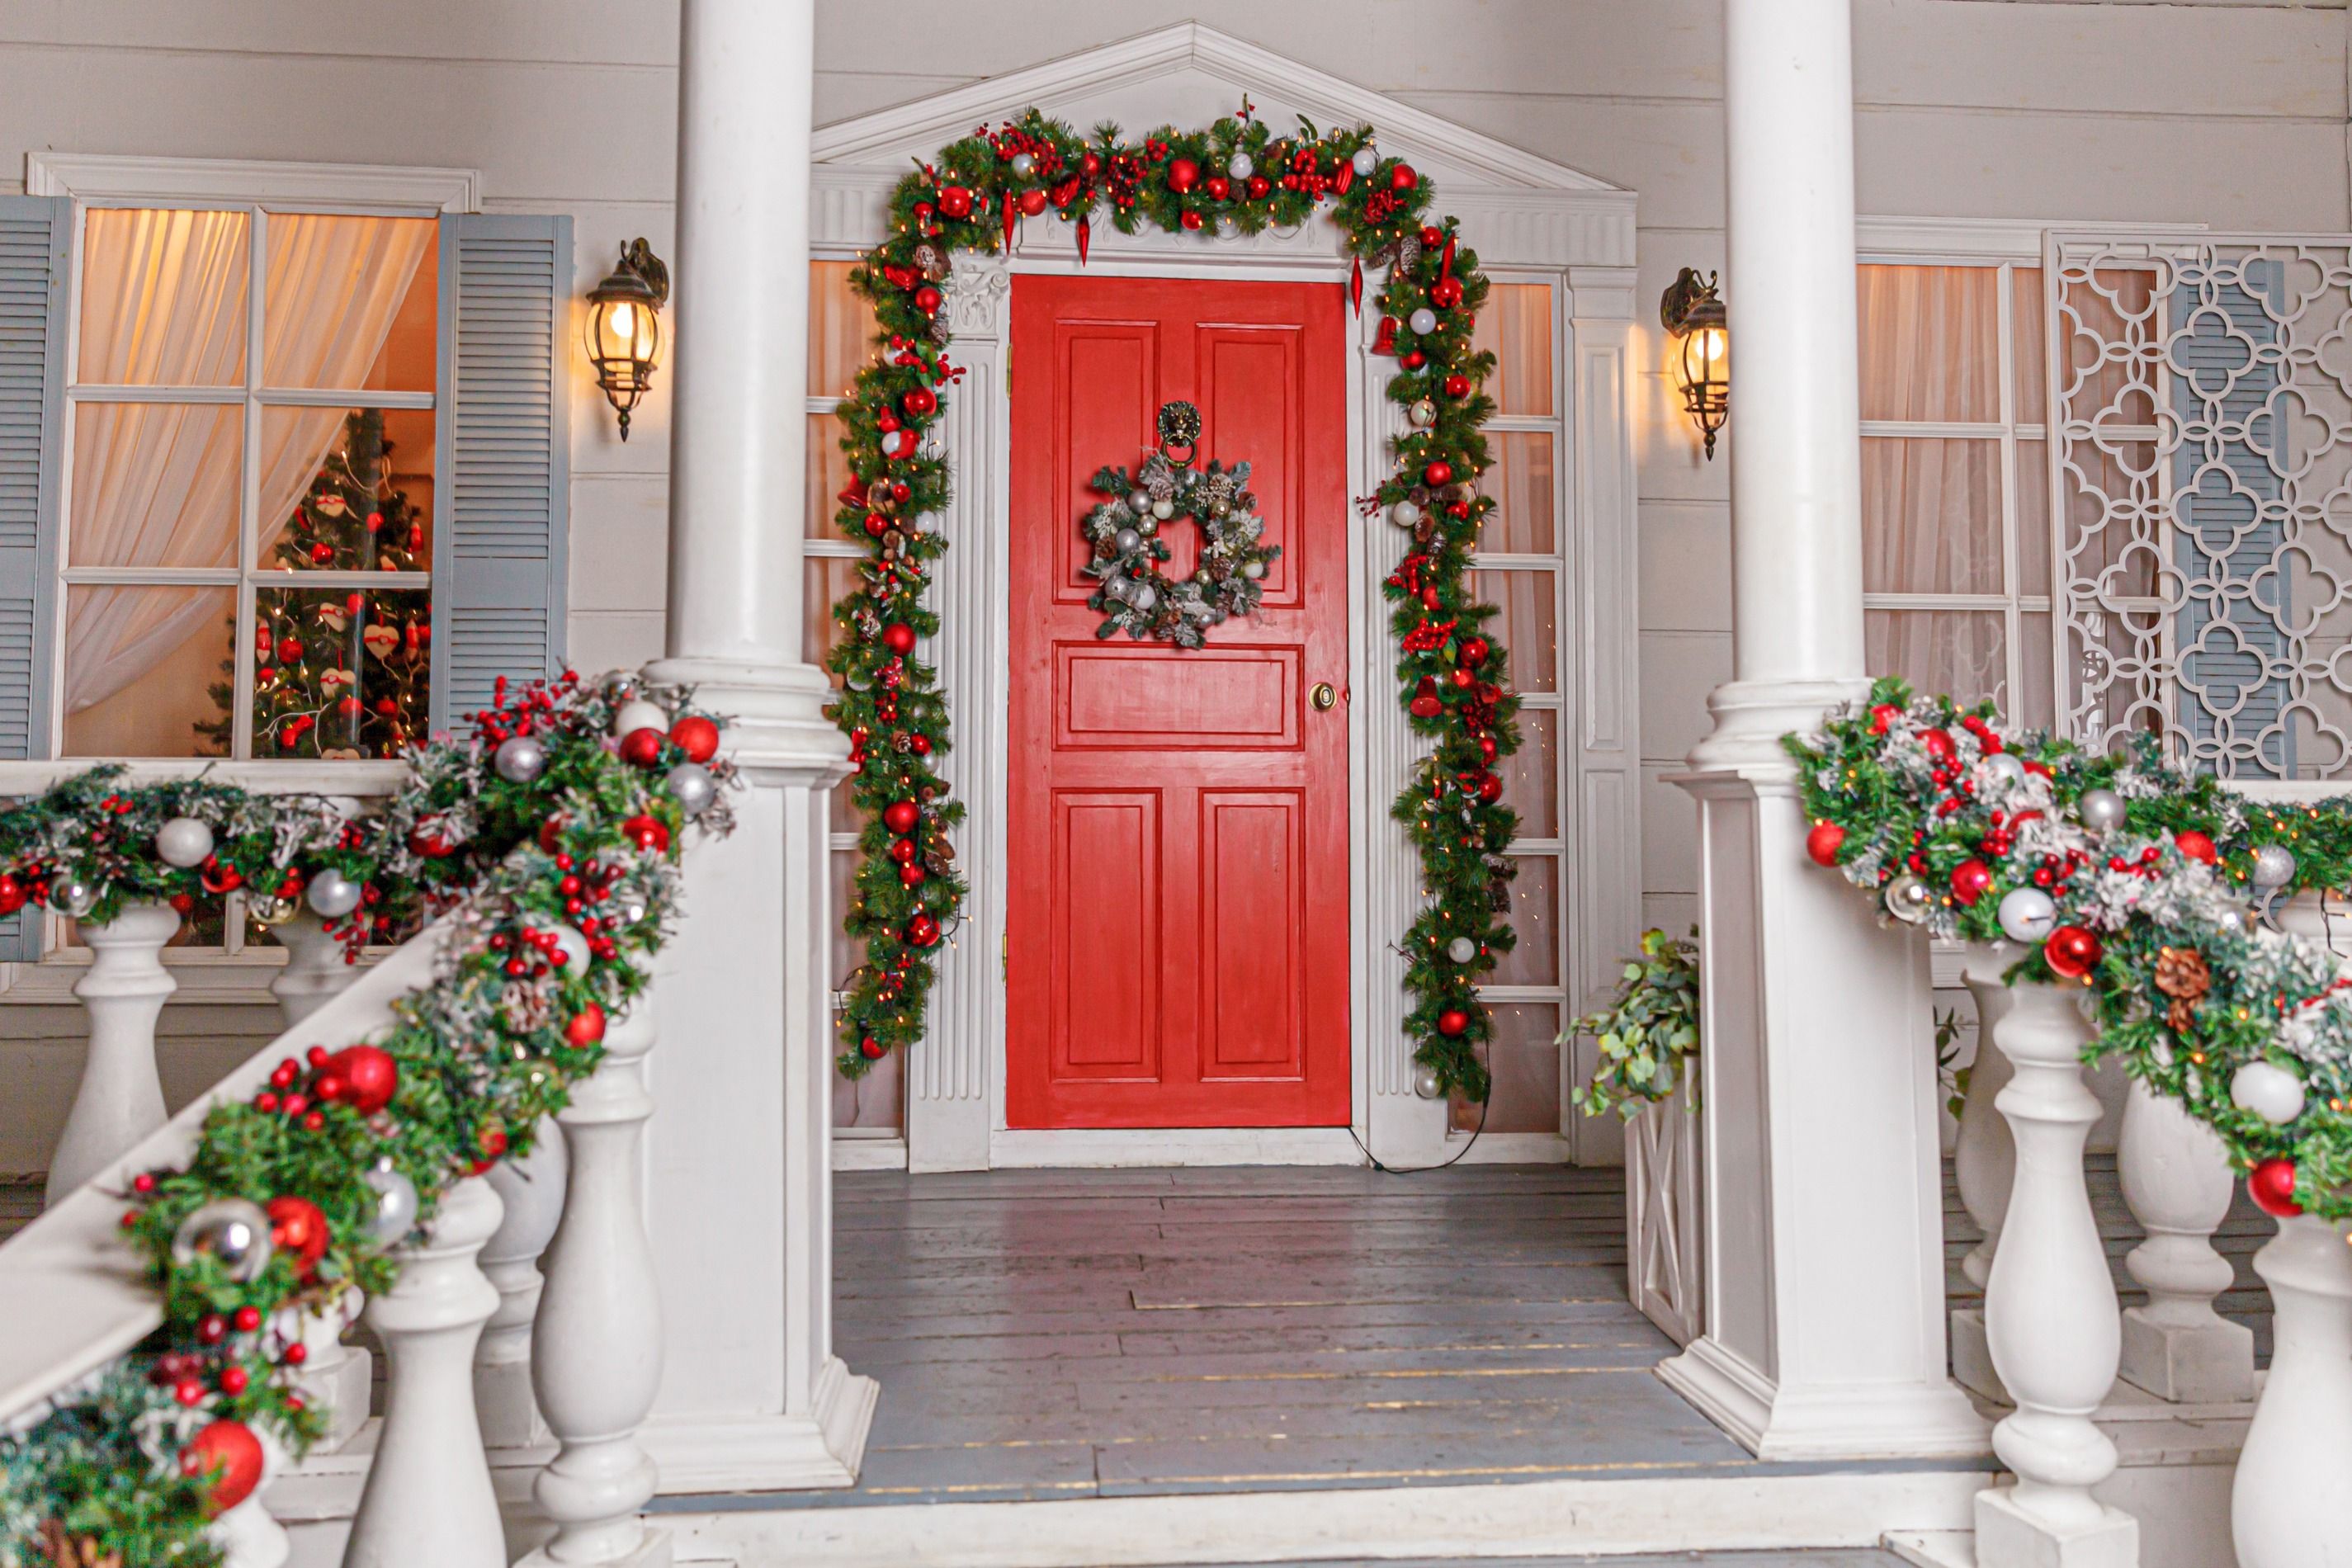 Festive front porch with Christmas bulbs and garland